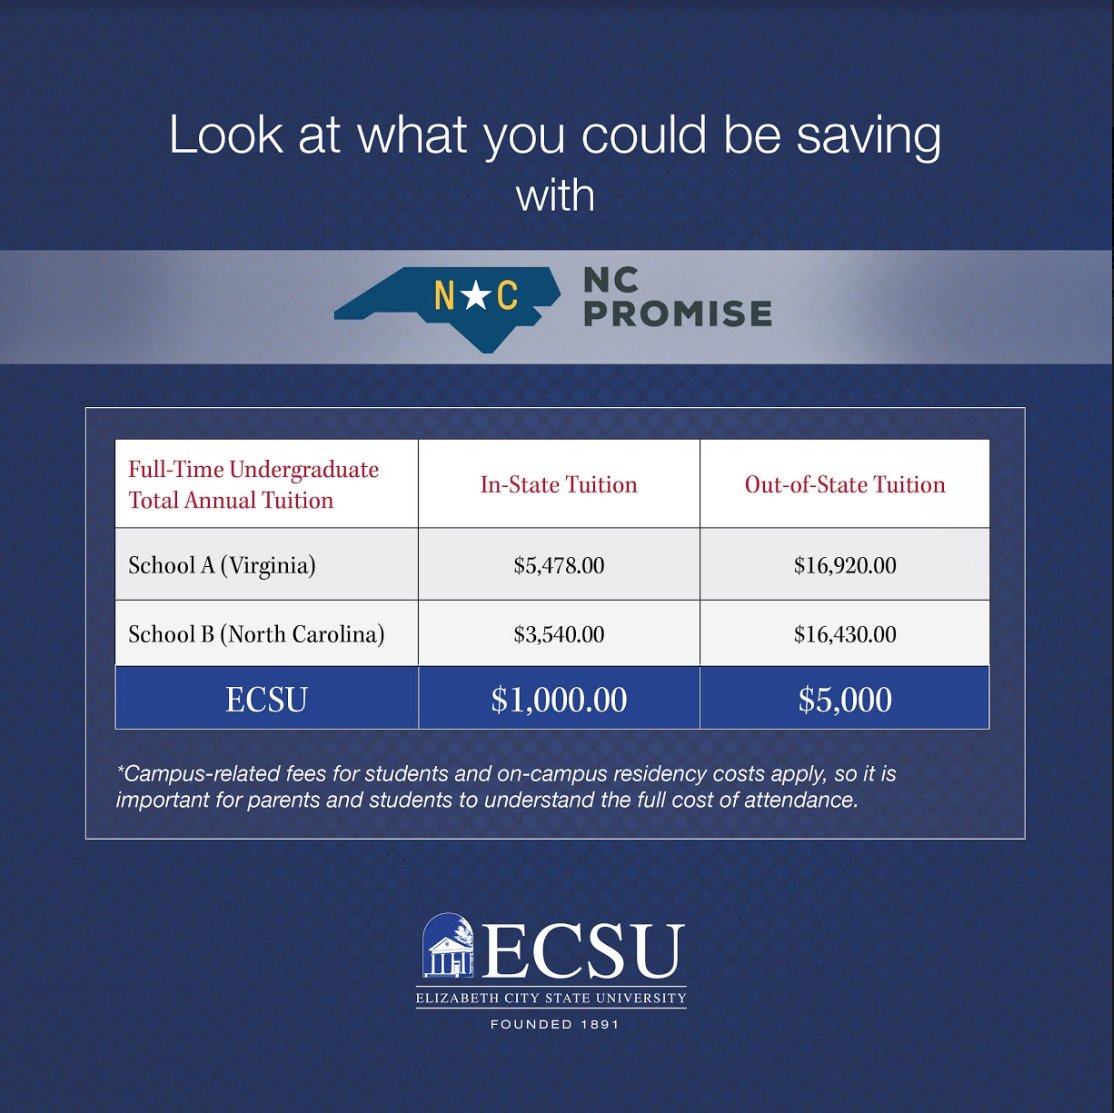 Have you applied to #ECSU yet? Look at what you could be saving with #NCPromise! Learn more at - ecsu.edu/ncpromise

#AffordableEducation #AccessibleEducation #ChooseECSU